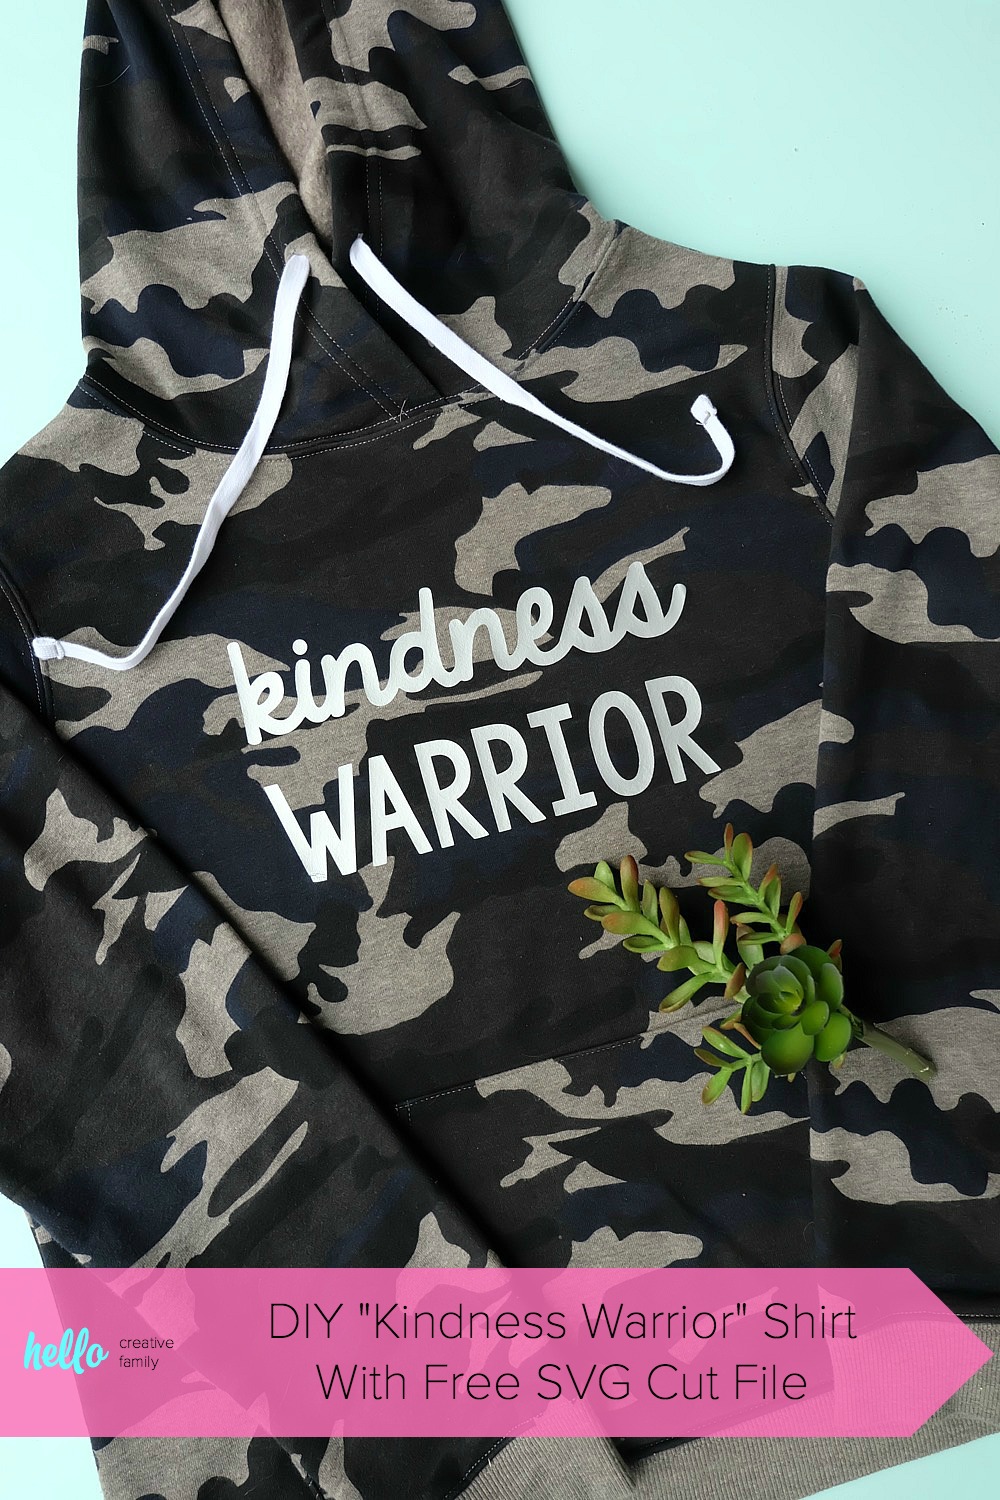 Spread kindness around the world! Let's create an army of kindness with this easy to make DIY Kindness Warrior Shirt. Includes step by step instructions on how to make this project using a Cricut, along with a free SVG cut file compatible with Cricut or Silhouette. The perfect hoodie for kids or adults to spread love instead of hate, discourage bullying and make the world a better place. #DIY #Cricut #Silhouette #SVG 